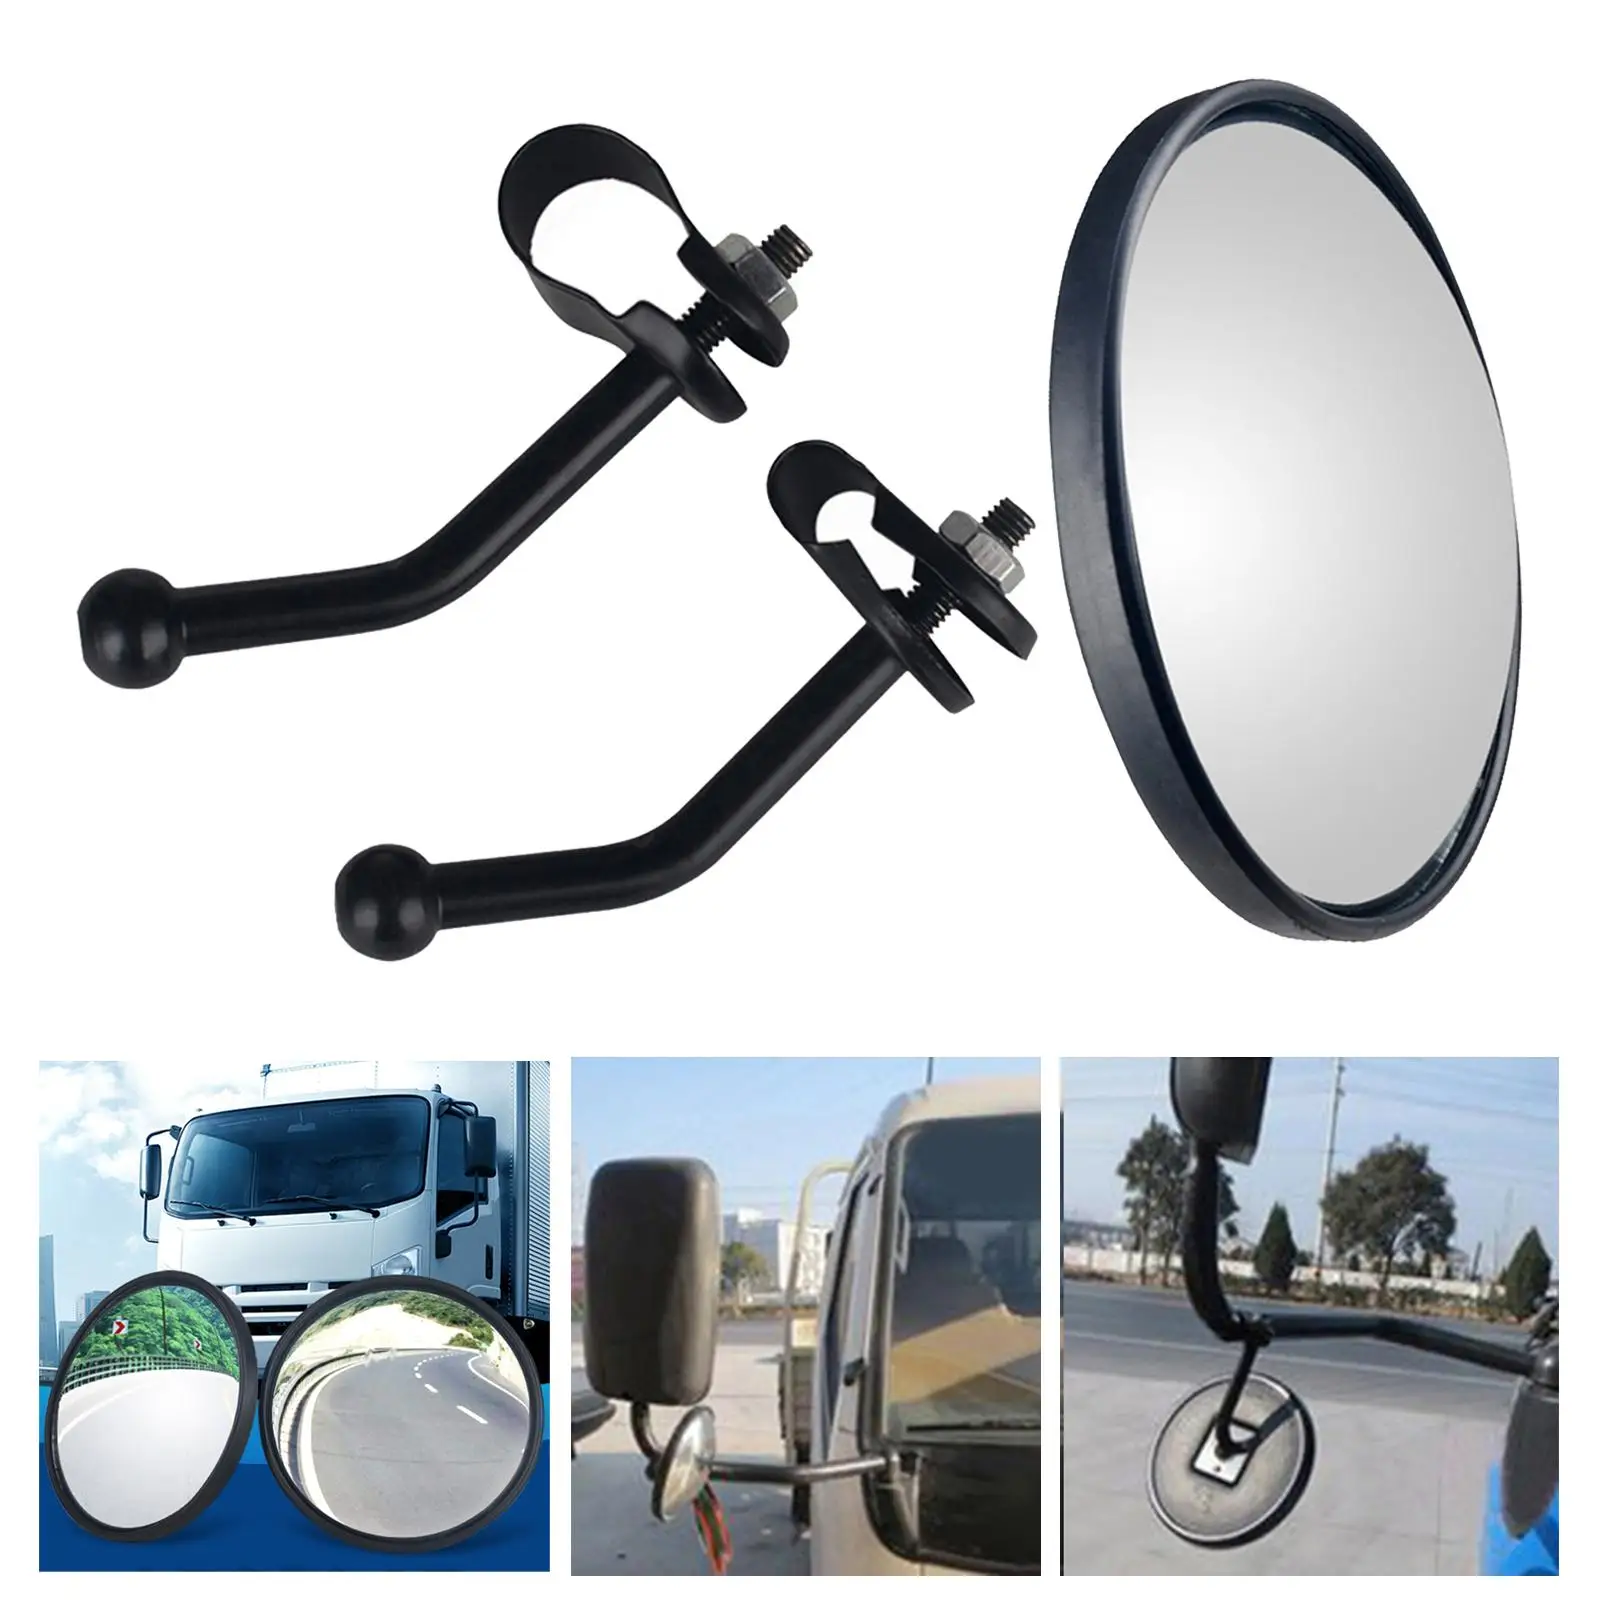 Adjustable Blind Spot Mirrors Car Auxiliary Accessories Replacement Rearview Large View Field Convex Mirror for School Bus